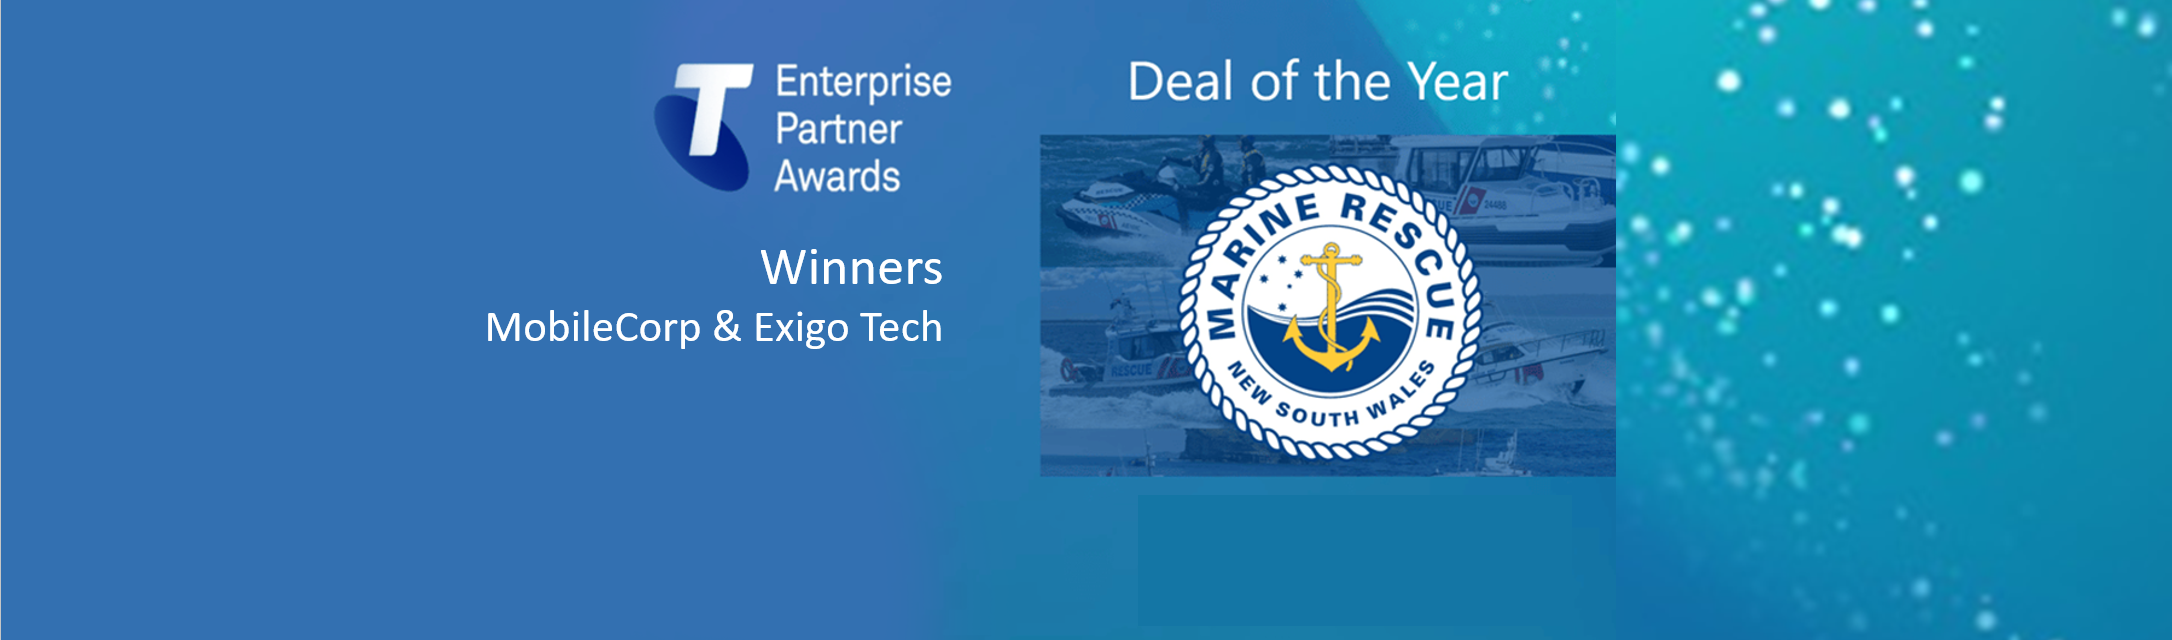 MobileCorp wins Telstra Enterprise Partner Deal of the Year resized-2